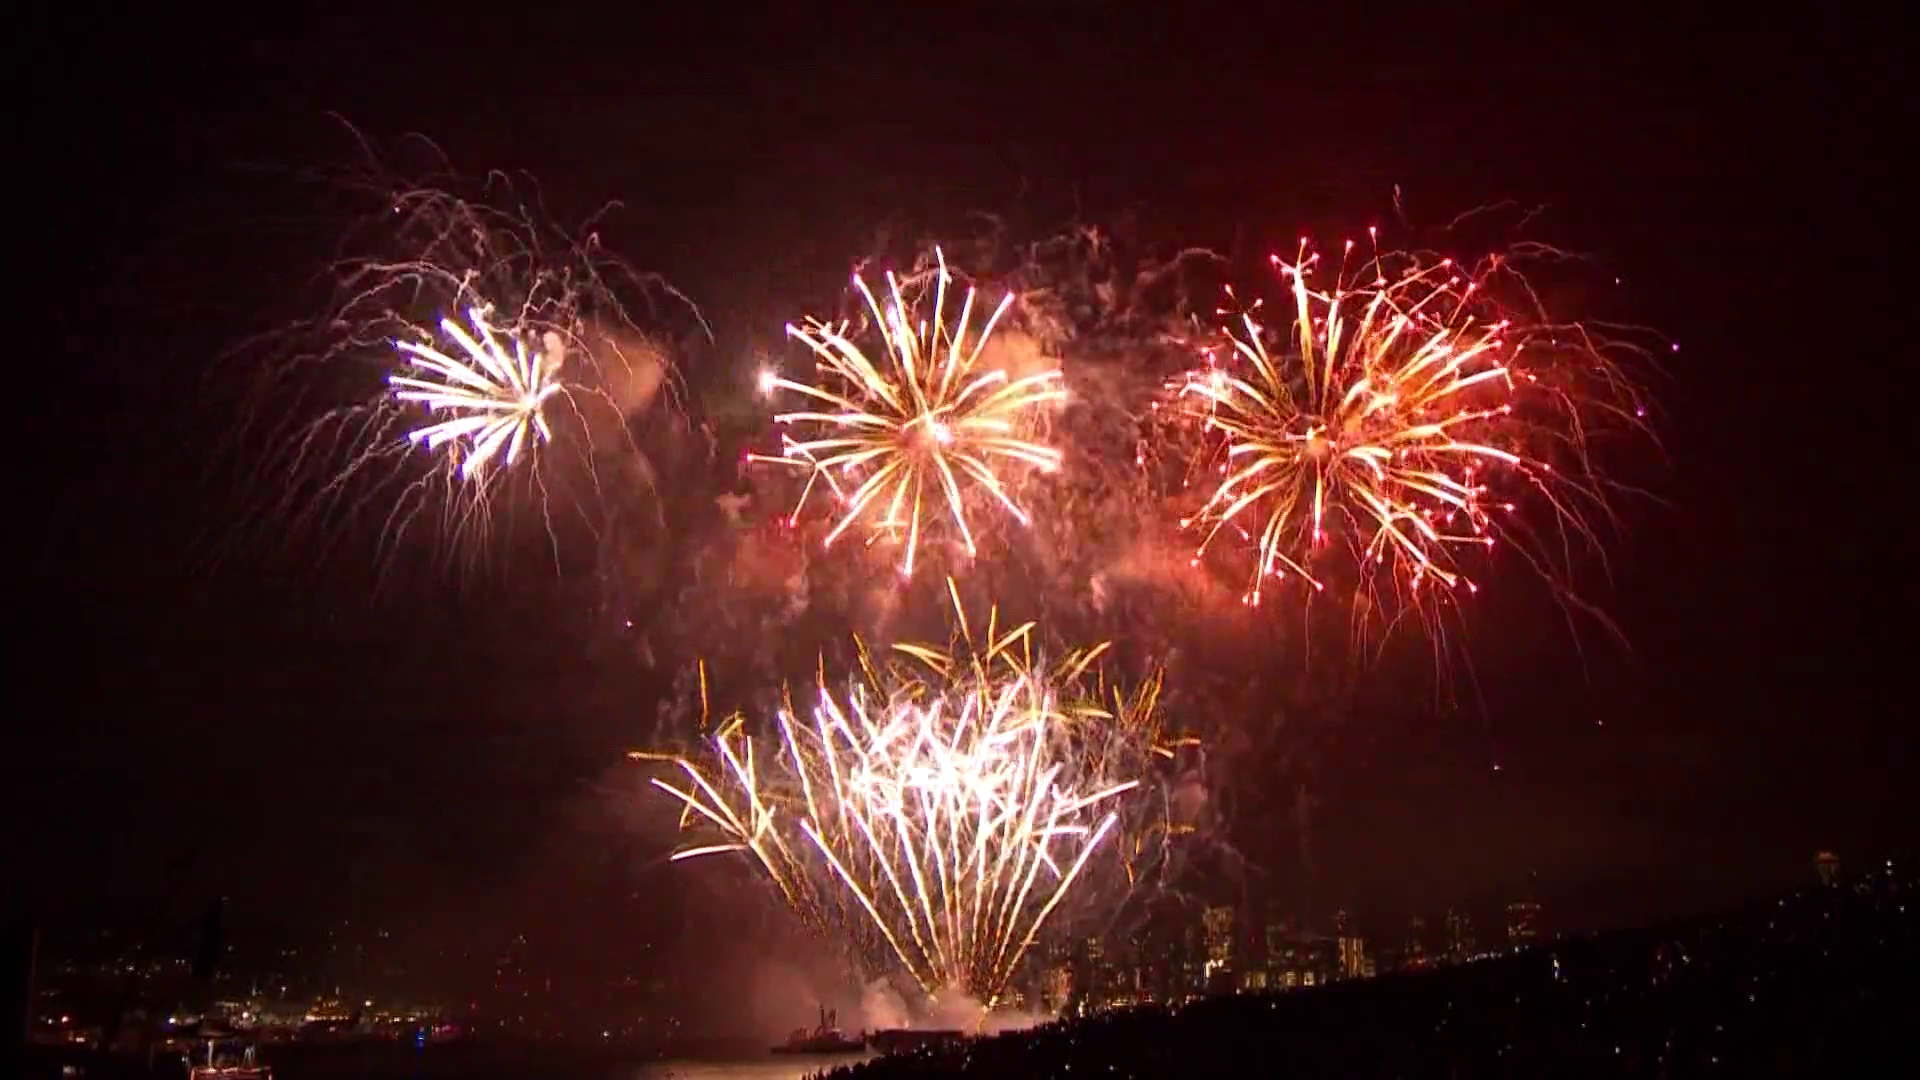 The city celebrated The Fourth of July with the return of the fireworks show over Lake Union.